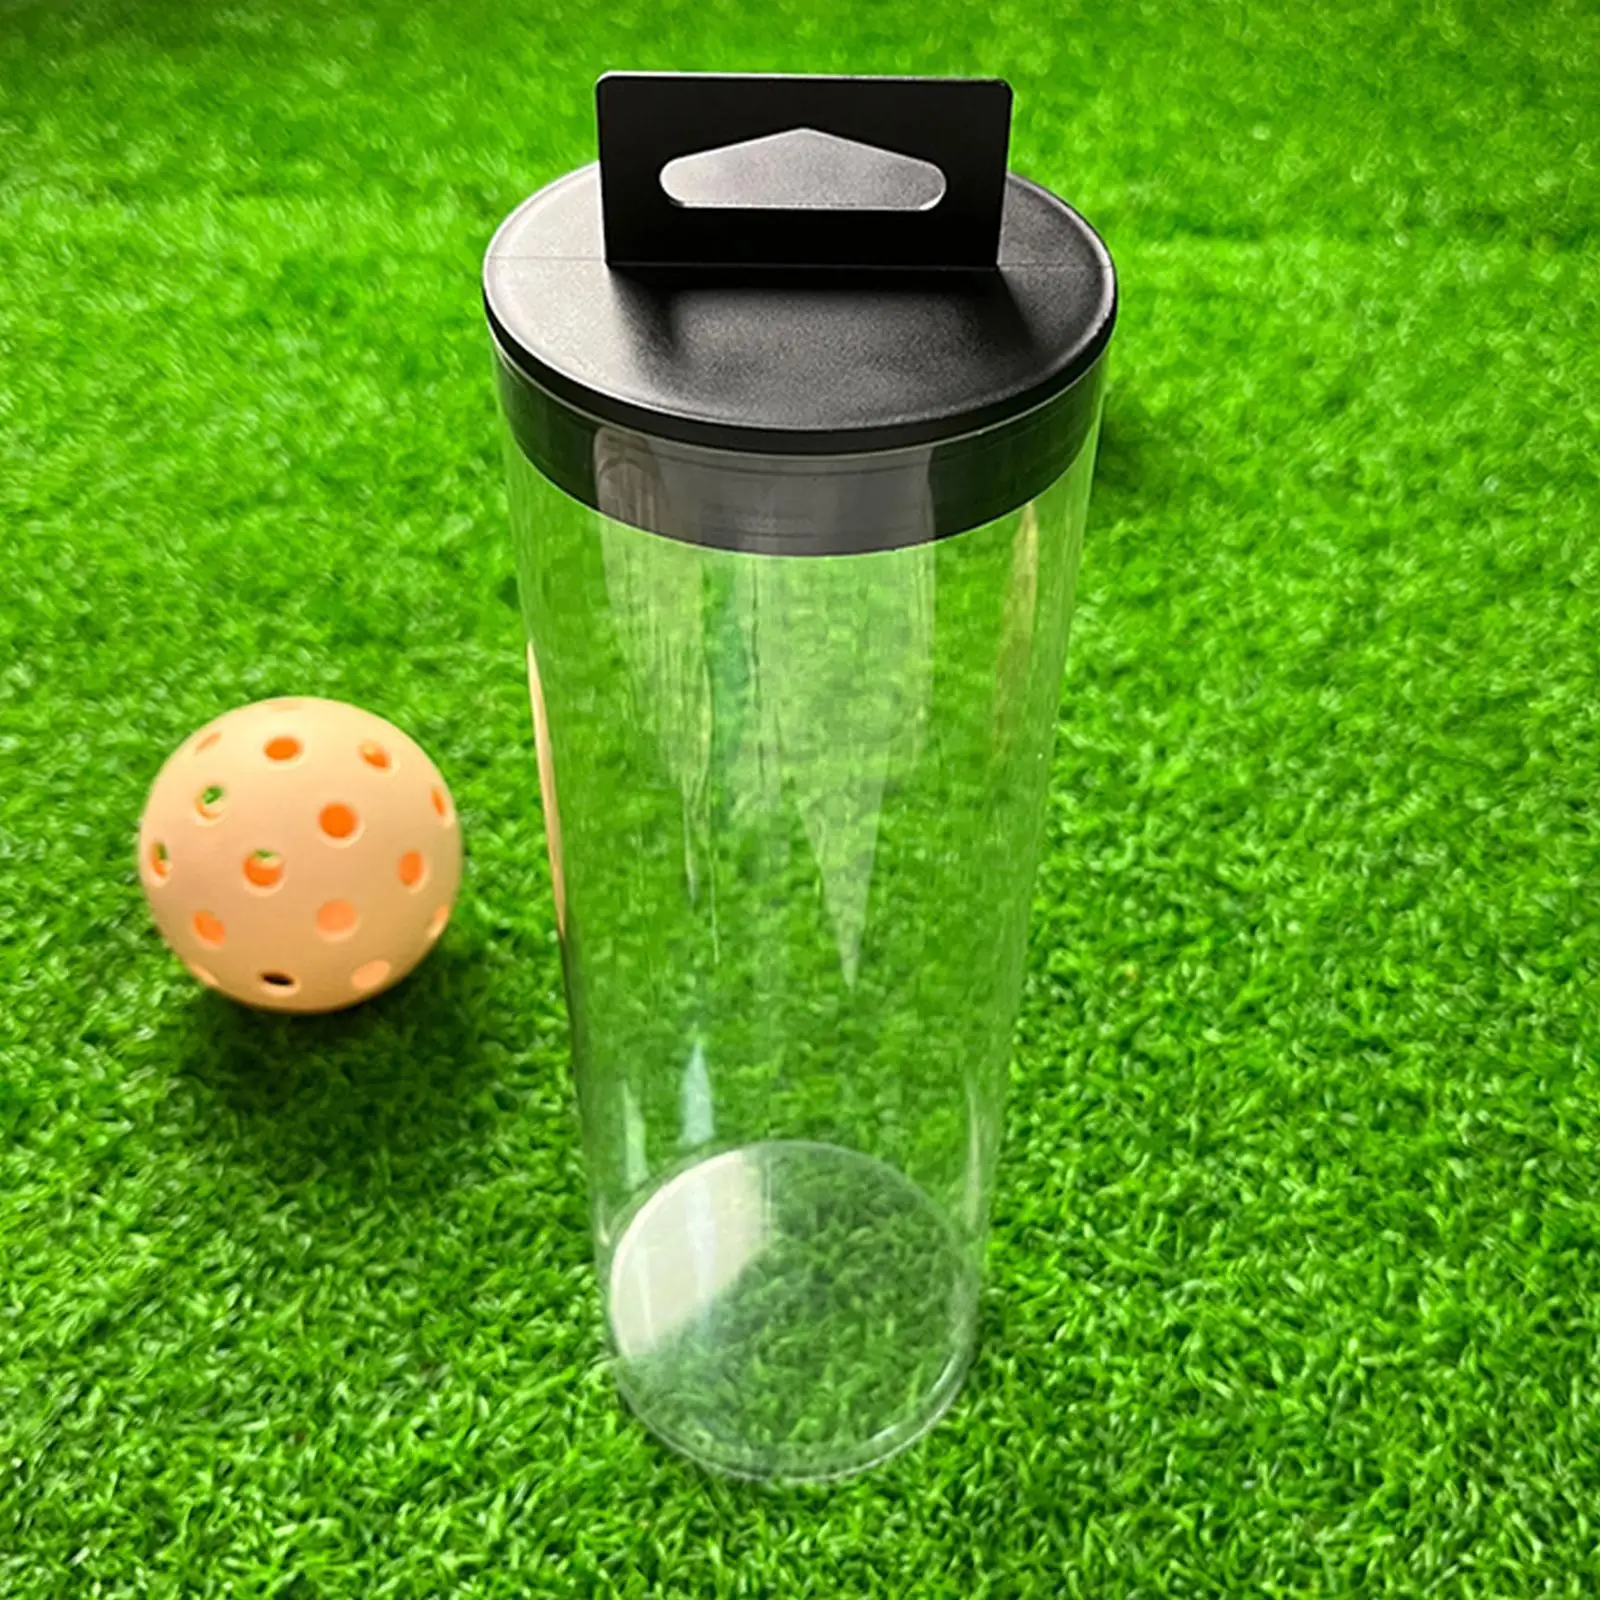 Tennis Ball Holder Carrier Gadgets Transparent Storage Tin Pickleball Bucket Canister Cylinder for Training Practice Accessories